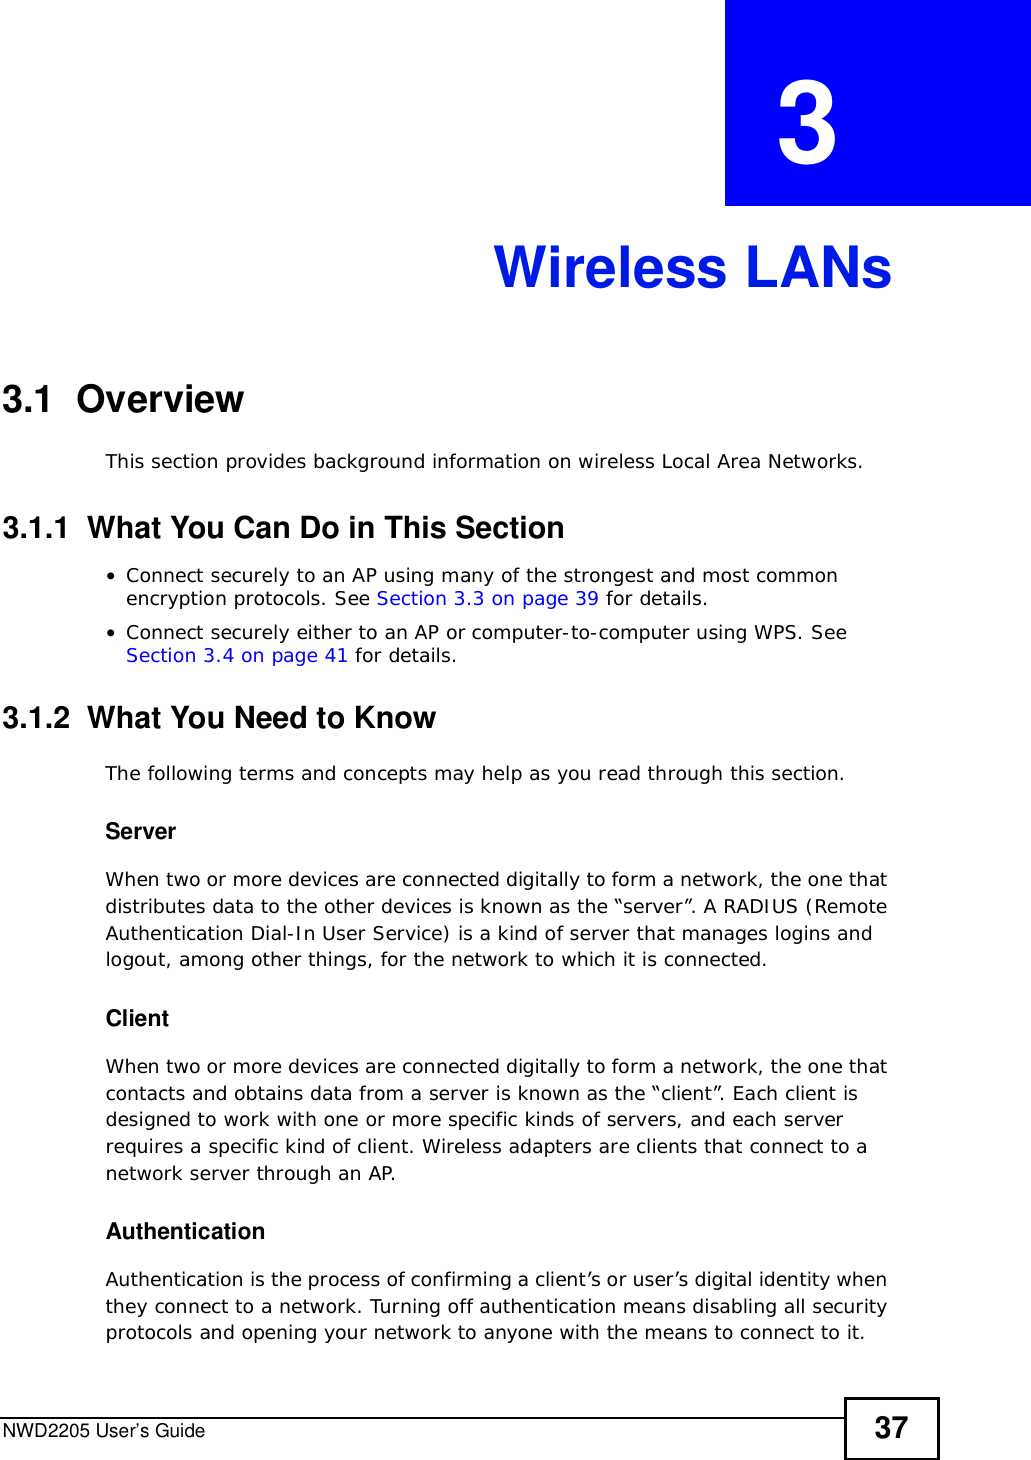 NWD2205 User’s Guide 37CHAPTER  3 Wireless LANs3.1  OverviewThis section provides background information on wireless Local Area Networks.3.1.1  What You Can Do in This Section•Connect securely to an AP using many of the strongest and most common encryption protocols. See Section 3.3 on page 39 for details.•Connect securely either to an AP or computer-to-computer using WPS. See Section 3.4 on page 41 for details.3.1.2  What You Need to KnowThe following terms and concepts may help as you read through this section.ServerWhen two or more devices are connected digitally to form a network, the one that distributes data to the other devices is known as the “server”. A RADIUS (Remote Authentication Dial-In User Service) is a kind of server that manages logins and logout, among other things, for the network to which it is connected.ClientWhen two or more devices are connected digitally to form a network, the one that contacts and obtains data from a server is known as the “client”. Each client is designed to work with one or more specific kinds of servers, and each server requires a specific kind of client. Wireless adapters are clients that connect to a network server through an AP.AuthenticationAuthentication is the process of confirming a client’s or user’s digital identity when they connect to a network. Turning off authentication means disabling all security protocols and opening your network to anyone with the means to connect to it.